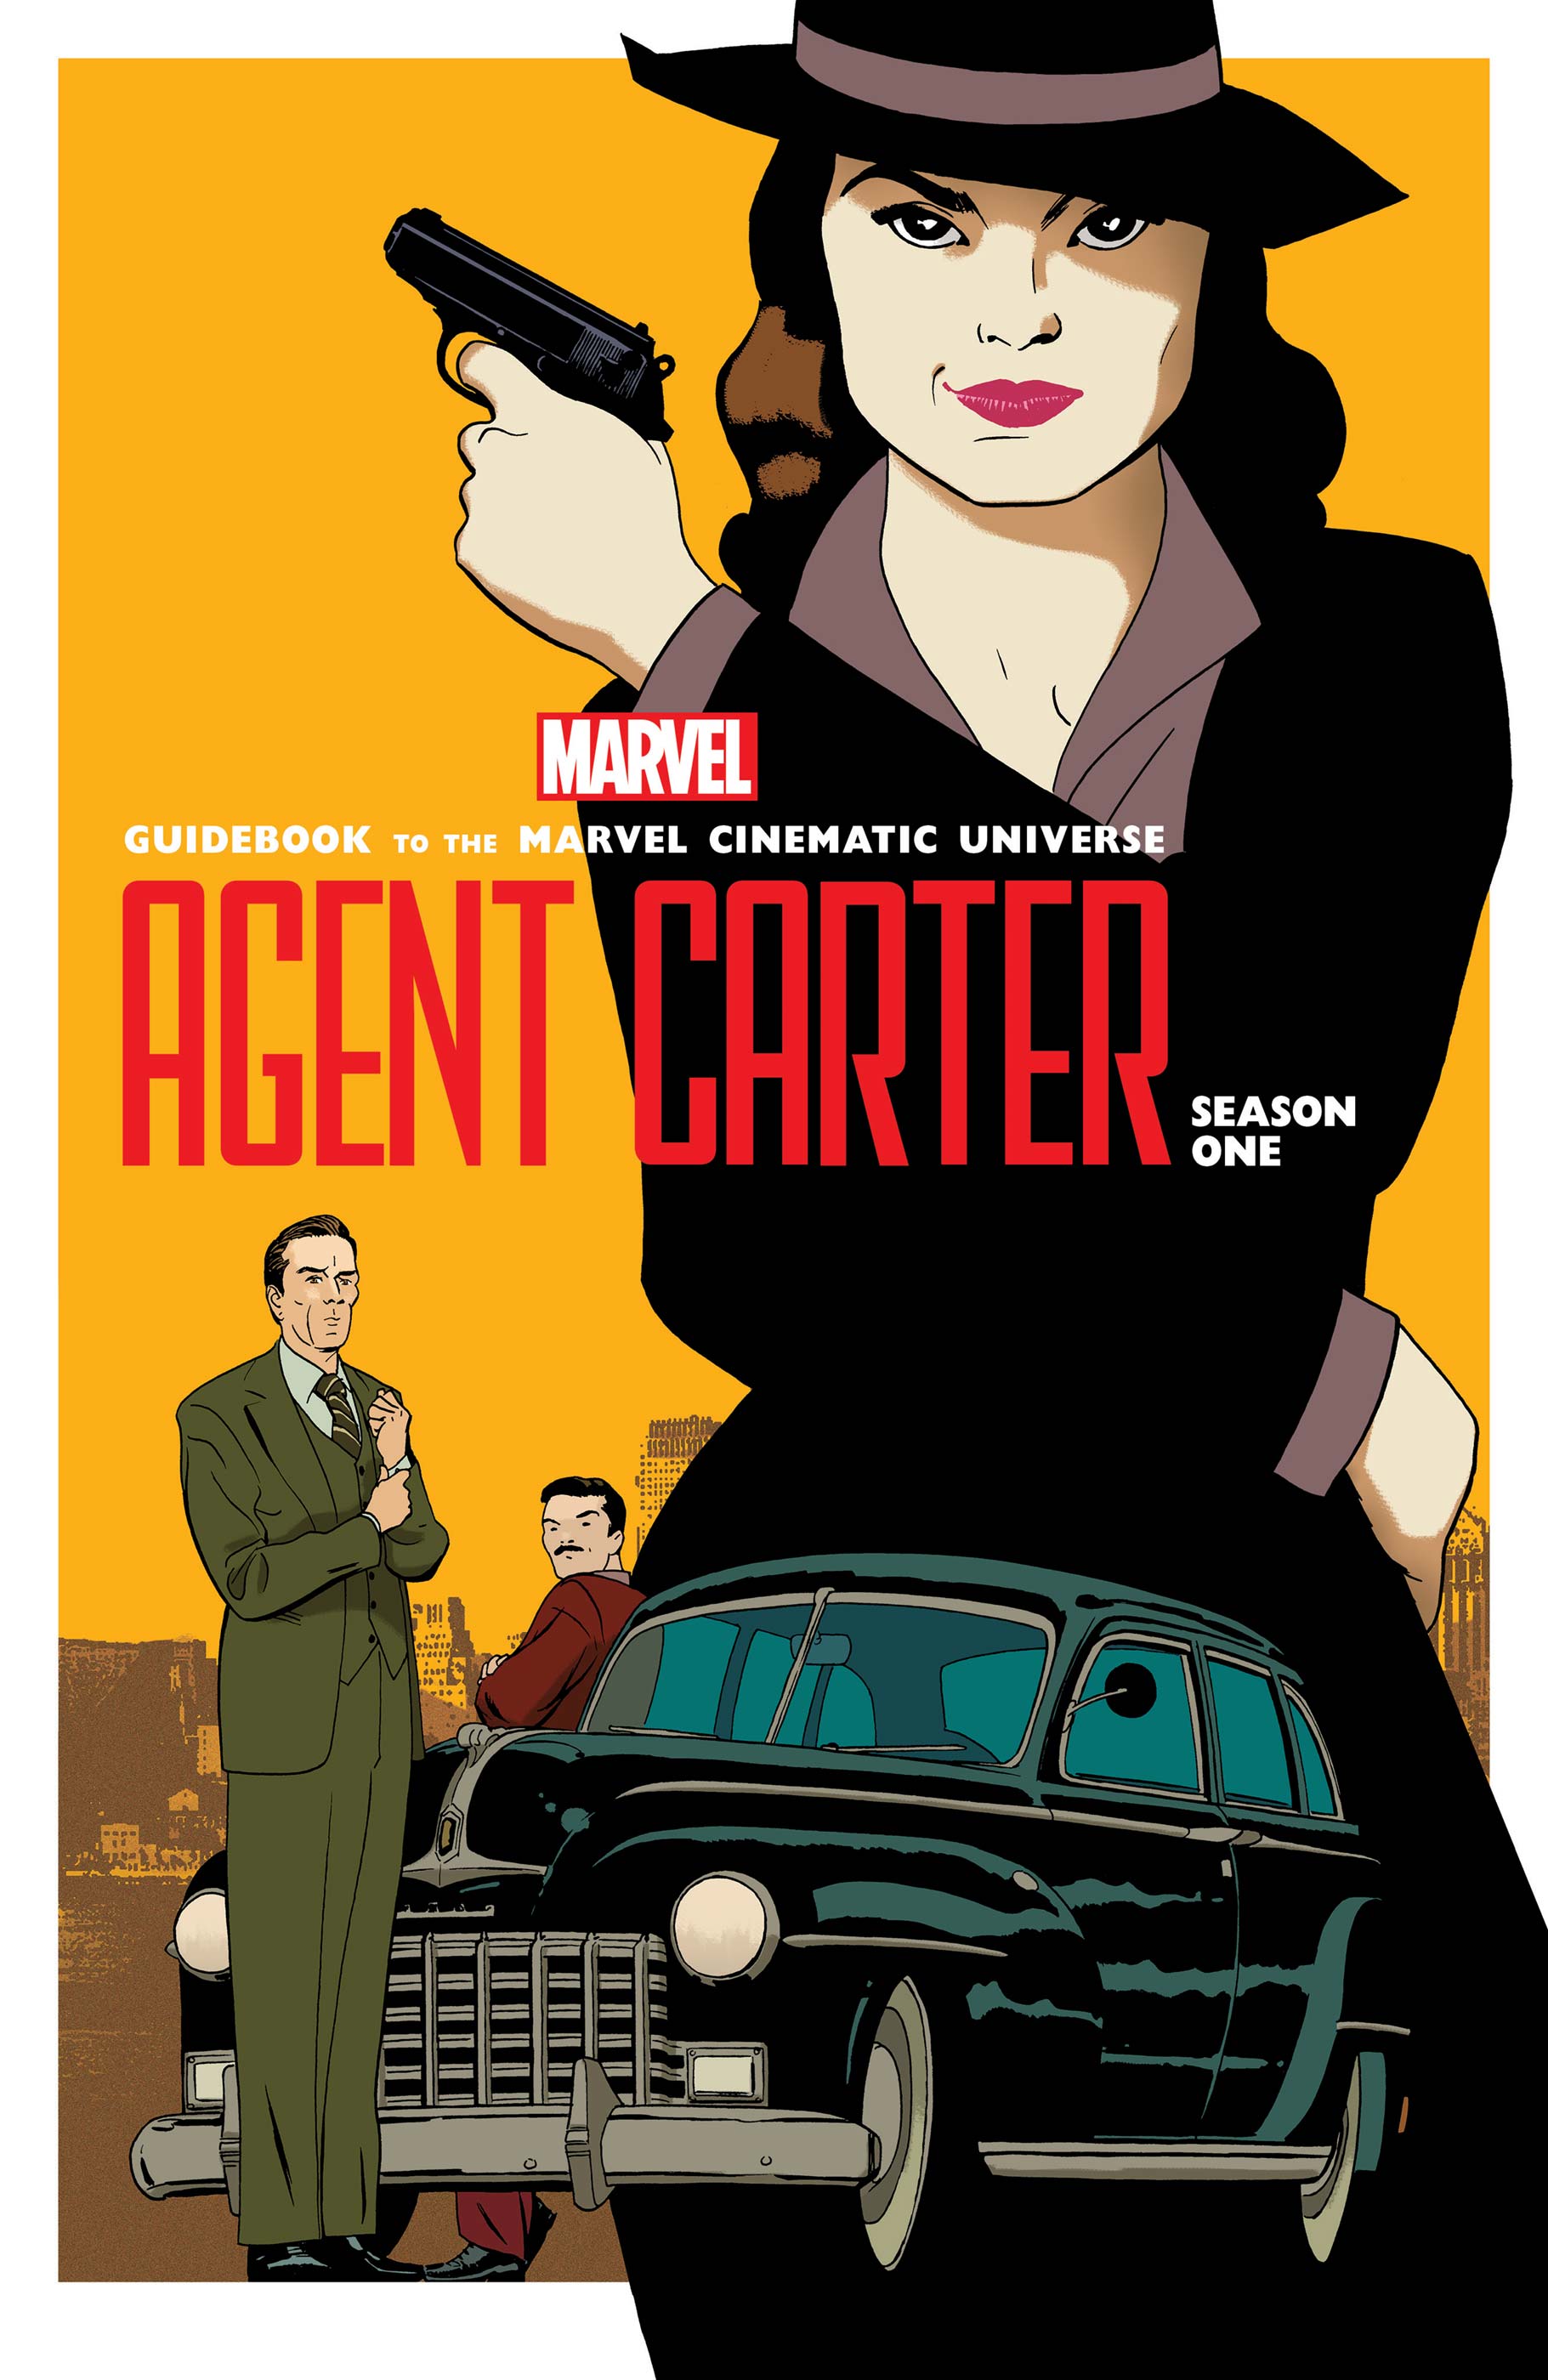 Guidebook to The Marvel Cinematic Universe - Marvel's Agent Carter Season One (2016)